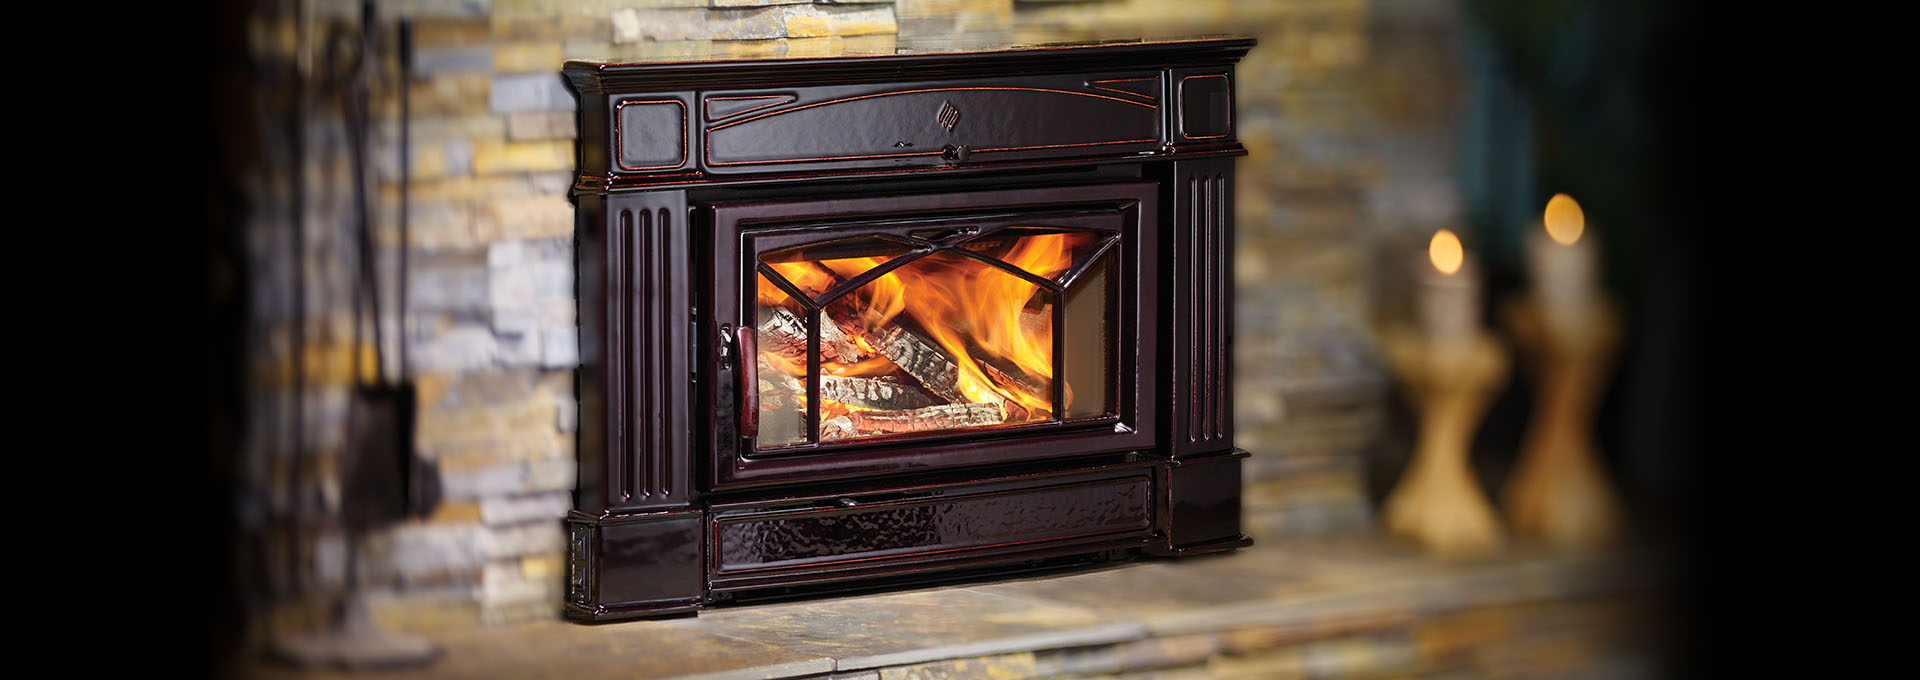 Heaters that Look Like Fireplaces Awesome Wood Inserts Epa Certified